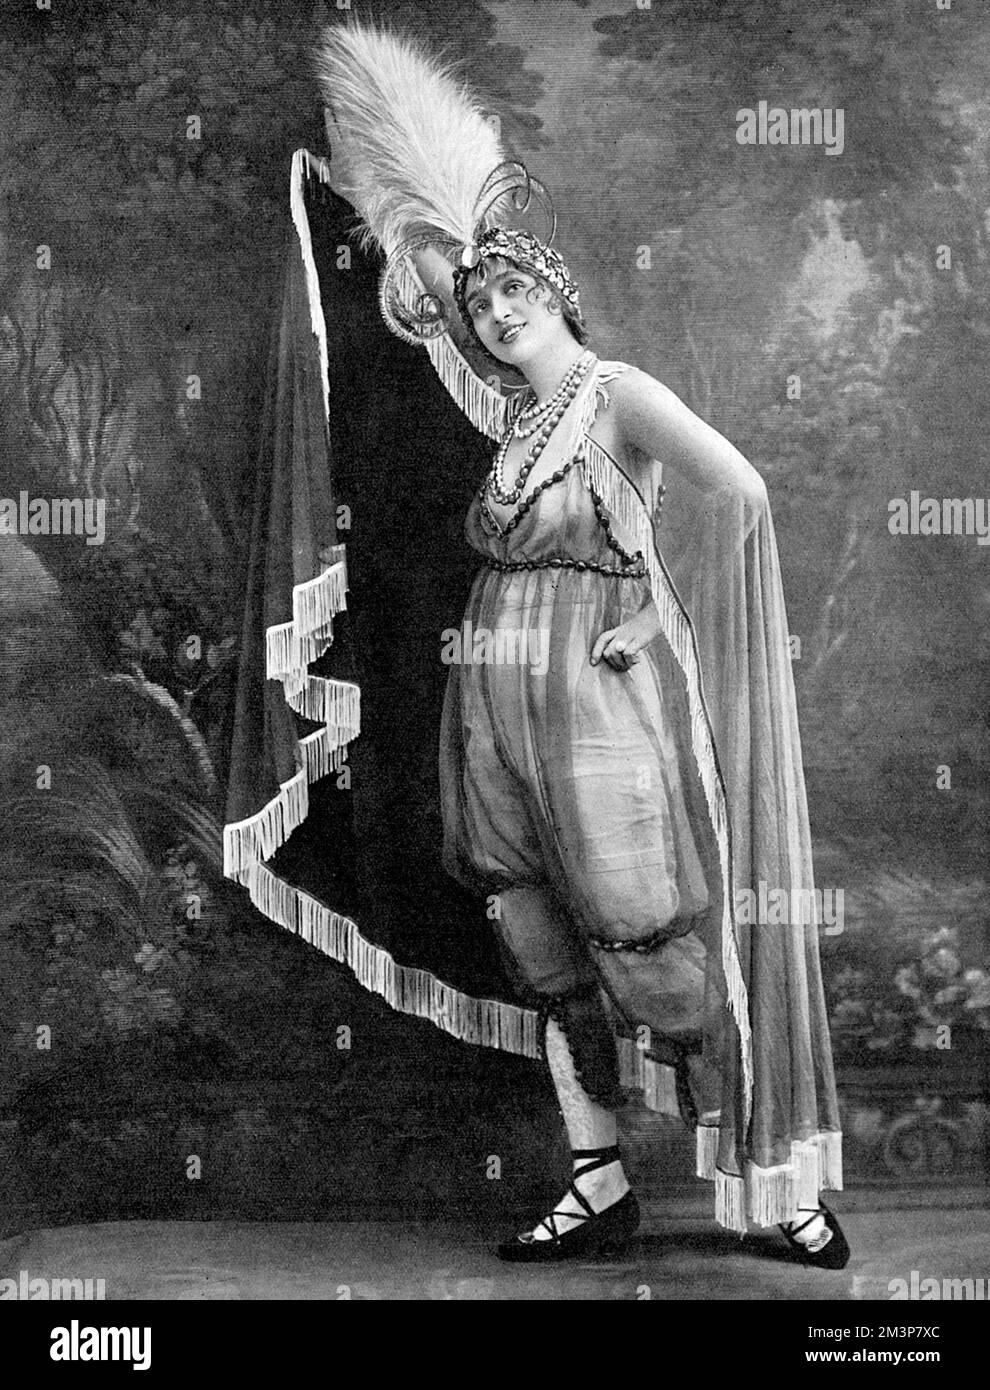 Gaby Deslys (1884 - 1920), French actress, music hall artiste and sometime lover of King Manuel II of Portugal, pictured in 1914 when she was appearing in 'The Passing Show,' at the Palace Theatre.  When war broke out, Gaby was in Ostend but managed to make her way to England.     Date: 1914 Stock Photo